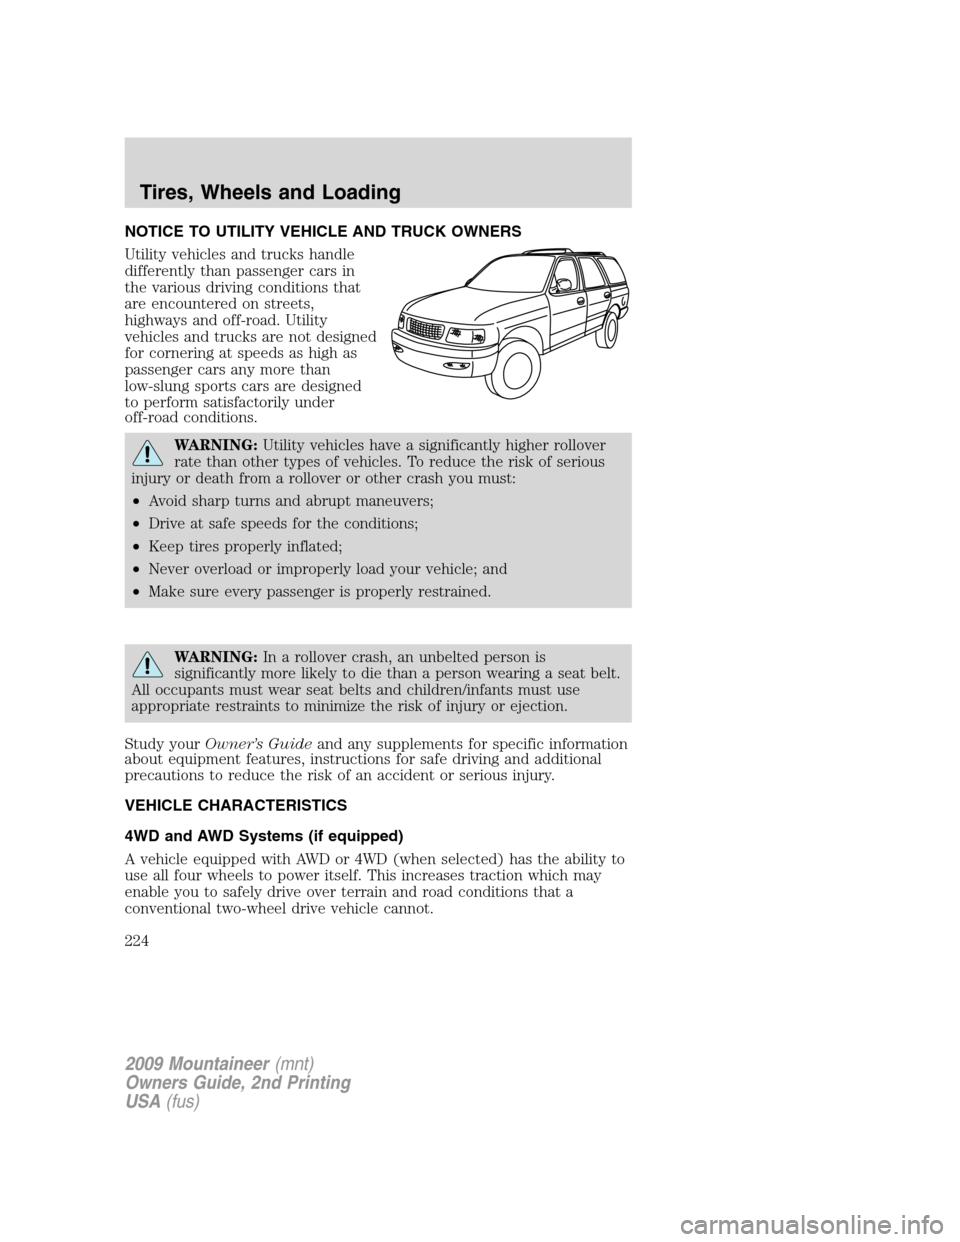 Mercury Mountaineer 2009  Owners Manuals NOTICE TO UTILITY VEHICLE AND TRUCK OWNERS
Utility vehicles and trucks handle
differently than passenger cars in
the various driving conditions that
are encountered on streets,
highways and off-road. 